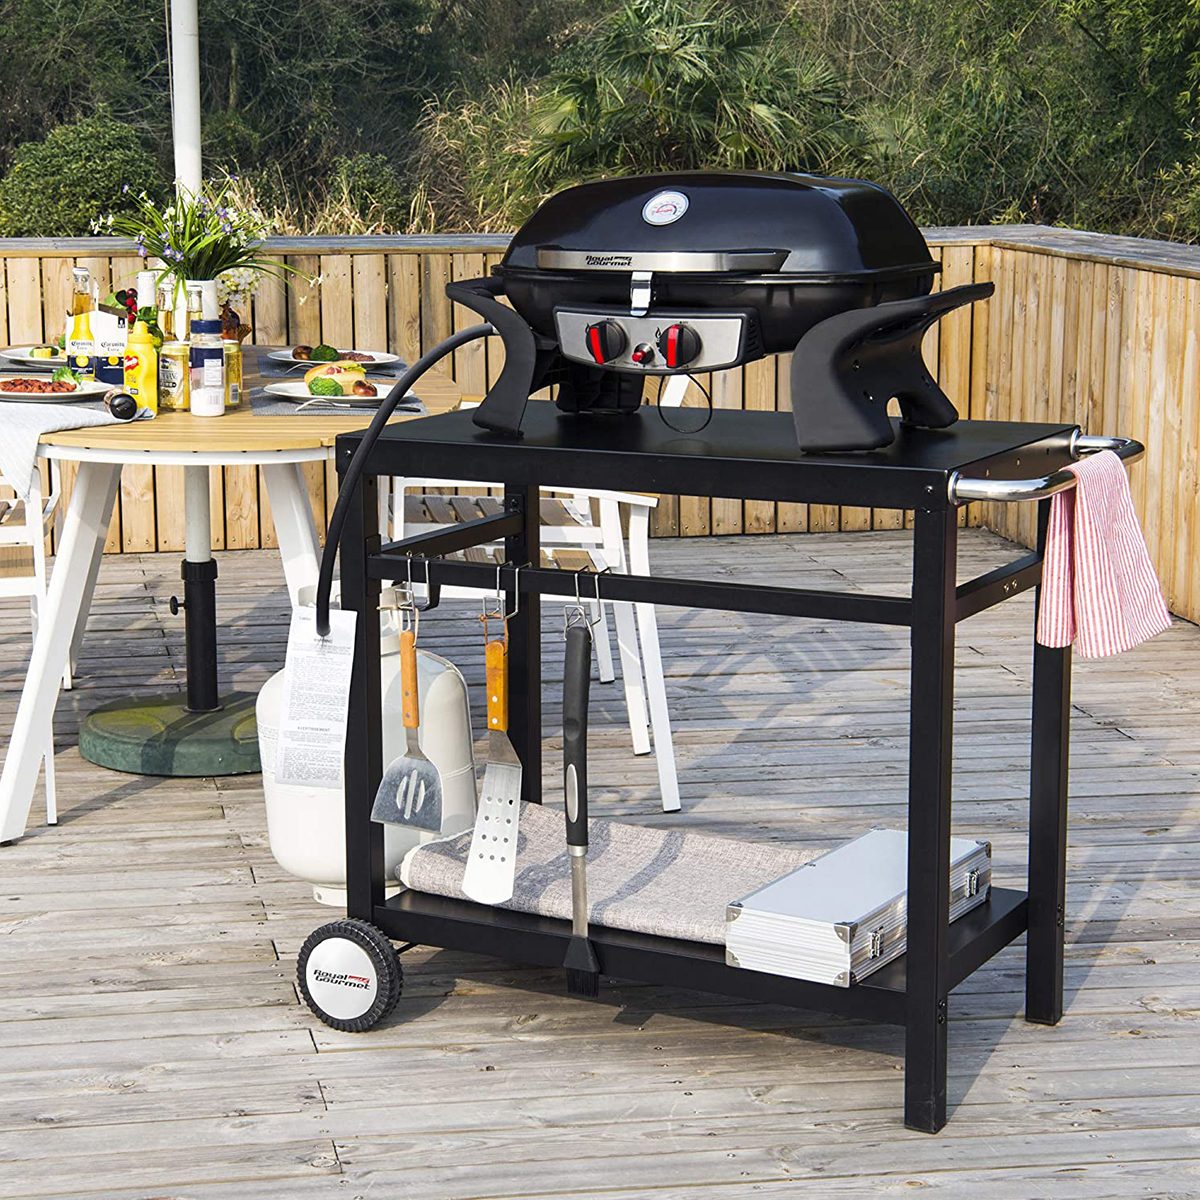 The 7 Best Grill Tables And Carts For The Ultimate Outdoor Cooking Experience FT Via Amazon.com  